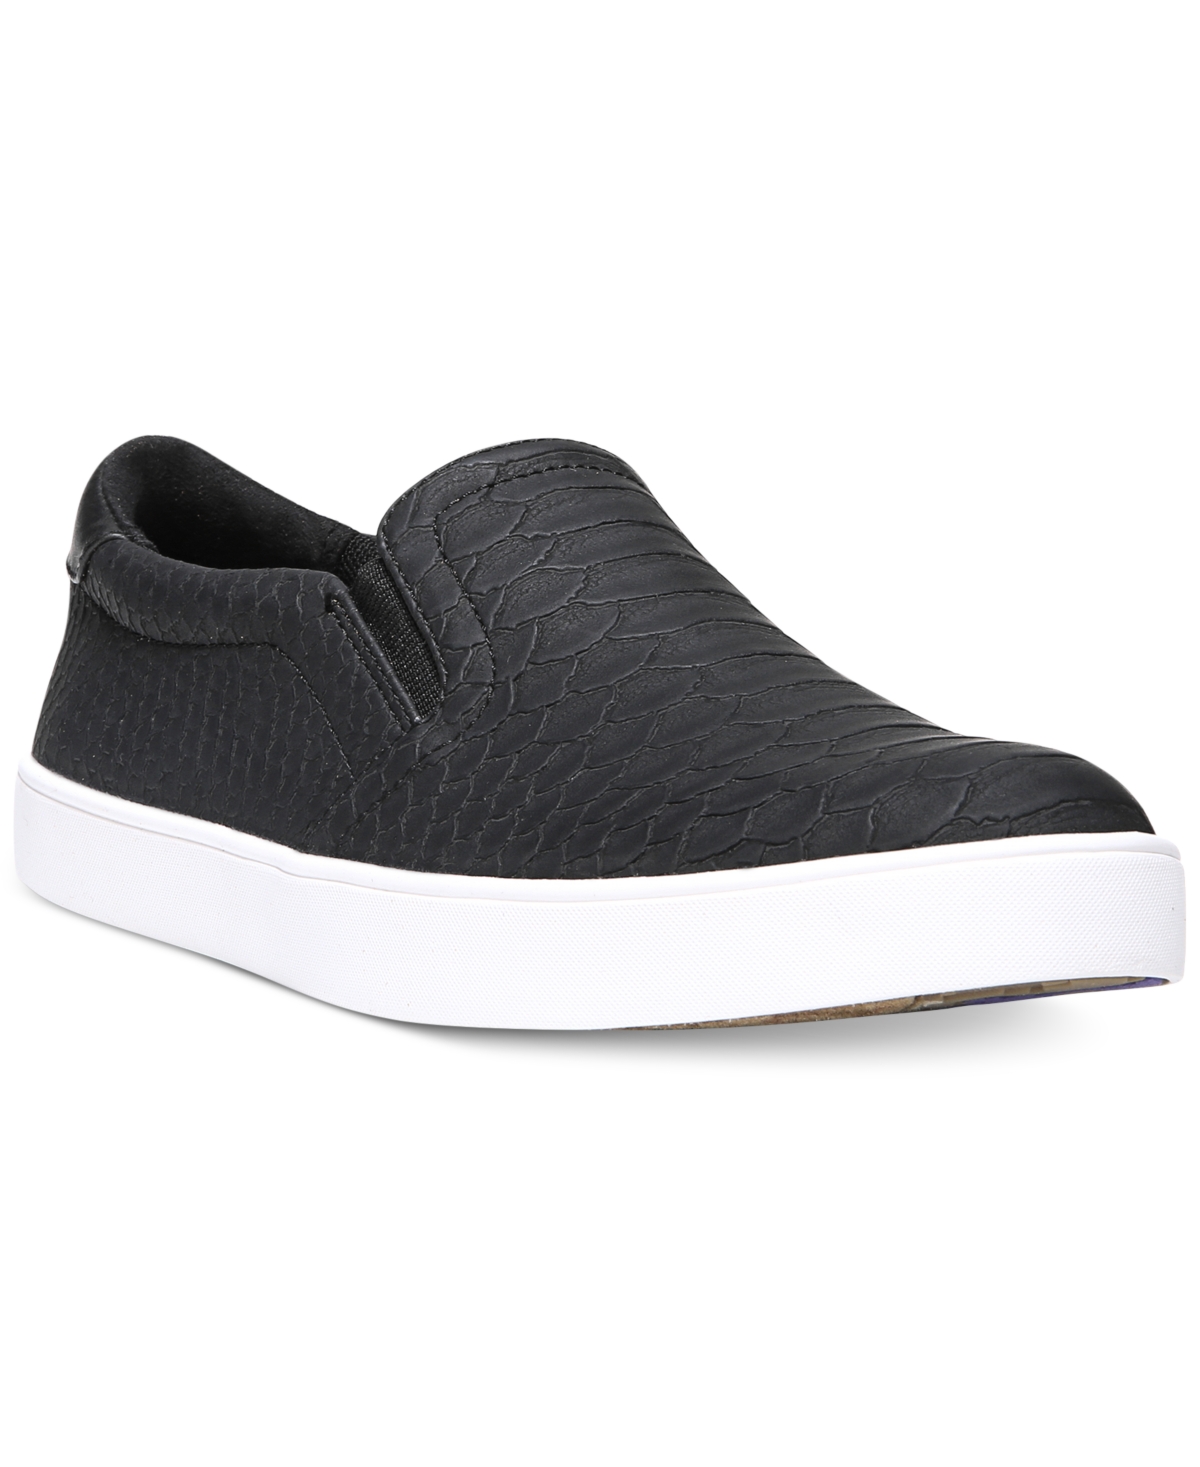 UPC 727679380171 product image for Dr. Scholl's Women's Madison Slip on Sneakers Women's Shoes | upcitemdb.com